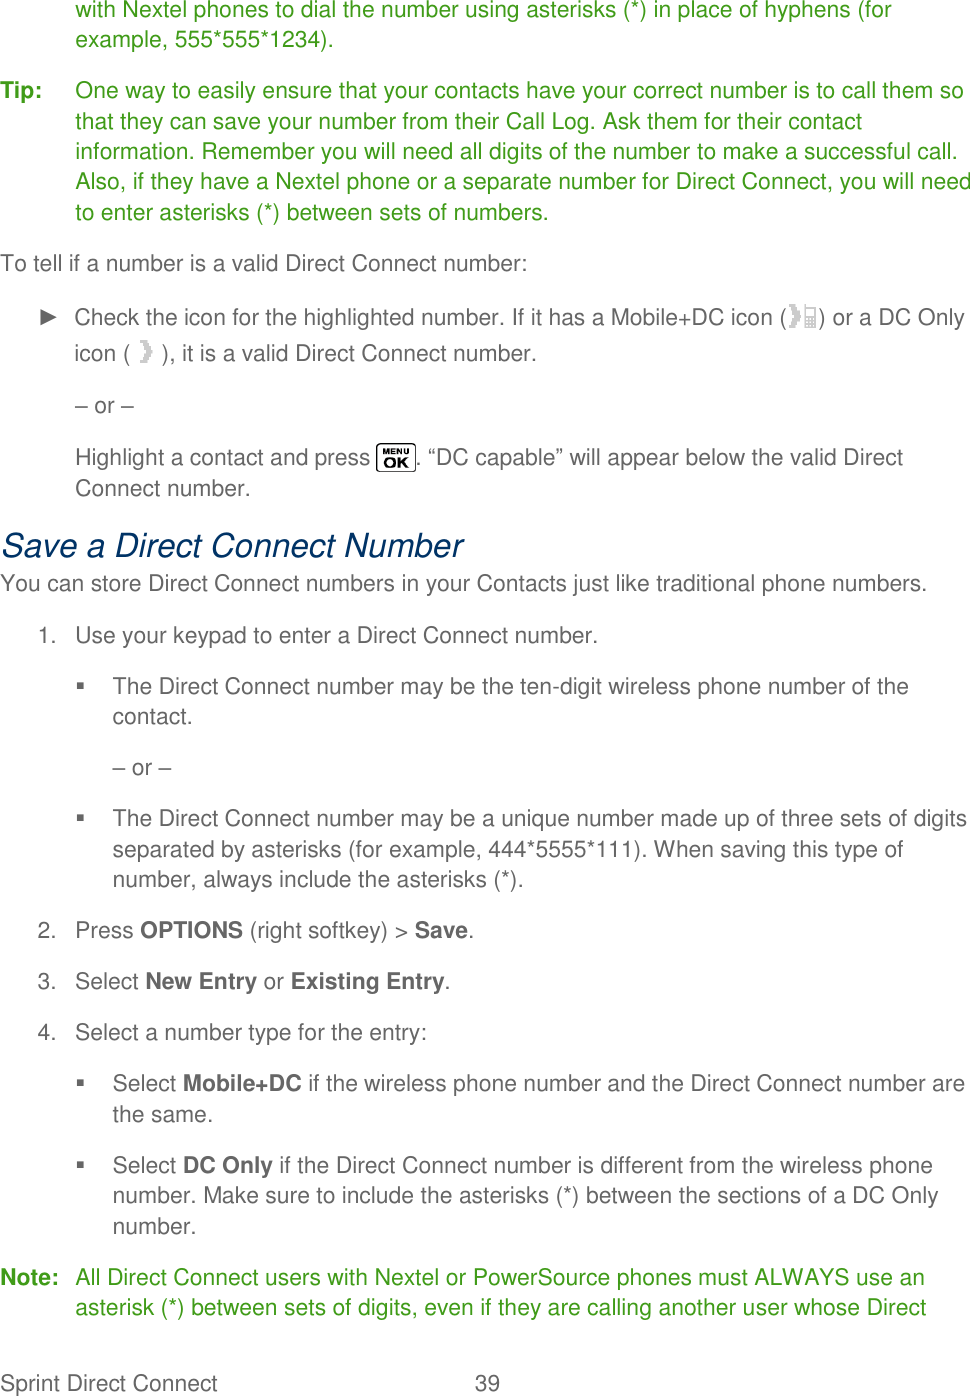  Sprint Direct Connect  39   with Nextel phones to dial the number using asterisks (*) in place of hyphens (for example, 555*555*1234). Tip:  One way to easily ensure that your contacts have your correct number is to call them so that they can save your number from their Call Log. Ask them for their contact information. Remember you will need all digits of the number to make a successful call. Also, if they have a Nextel phone or a separate number for Direct Connect, you will need to enter asterisks (*) between sets of numbers. To tell if a number is a valid Direct Connect number: ►  Check the icon for the highlighted number. If it has a Mobile+DC icon ( ) or a DC Only icon ( ), it is a valid Direct Connect number. – or – Highlight a contact and press  . ―DC capable‖ will appear below the valid Direct Connect number. Save a Direct Connect Number You can store Direct Connect numbers in your Contacts just like traditional phone numbers. 1.  Use your keypad to enter a Direct Connect number.   The Direct Connect number may be the ten-digit wireless phone number of the contact. – or –   The Direct Connect number may be a unique number made up of three sets of digits separated by asterisks (for example, 444*5555*111). When saving this type of number, always include the asterisks (*). 2.  Press OPTIONS (right softkey) &gt; Save. 3.  Select New Entry or Existing Entry. 4.  Select a number type for the entry:   Select Mobile+DC if the wireless phone number and the Direct Connect number are the same.   Select DC Only if the Direct Connect number is different from the wireless phone number. Make sure to include the asterisks (*) between the sections of a DC Only number. Note:  All Direct Connect users with Nextel or PowerSource phones must ALWAYS use an asterisk (*) between sets of digits, even if they are calling another user whose Direct 